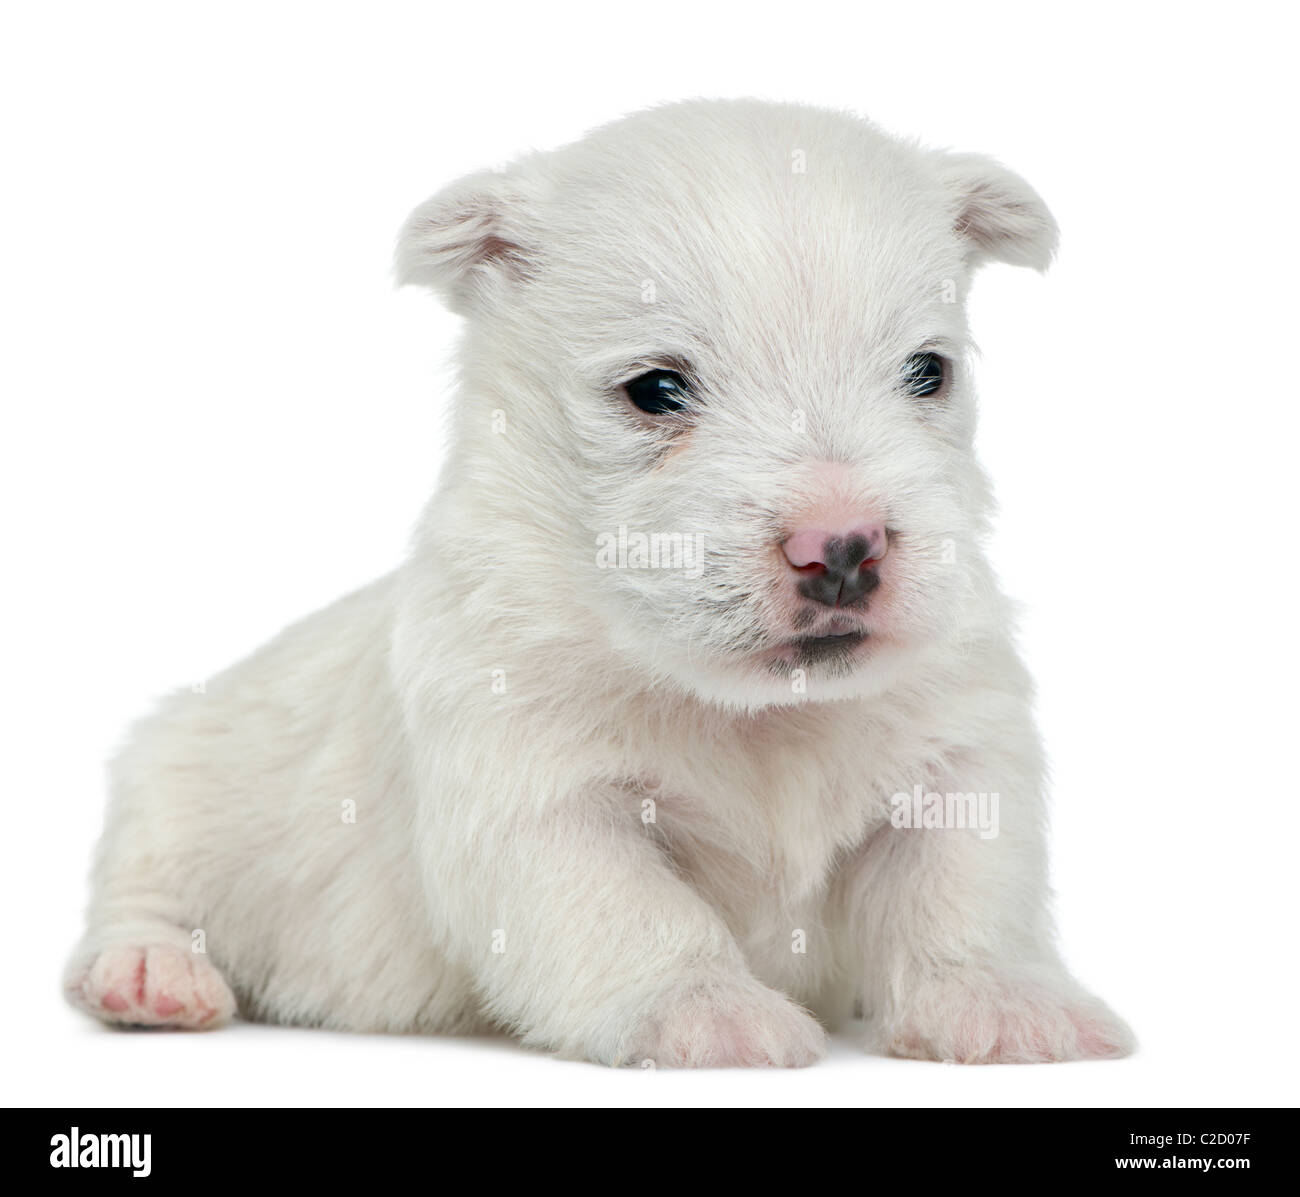 West Highland White Terrier puppy, 4 semaines, contre fond blanc Banque D'Images